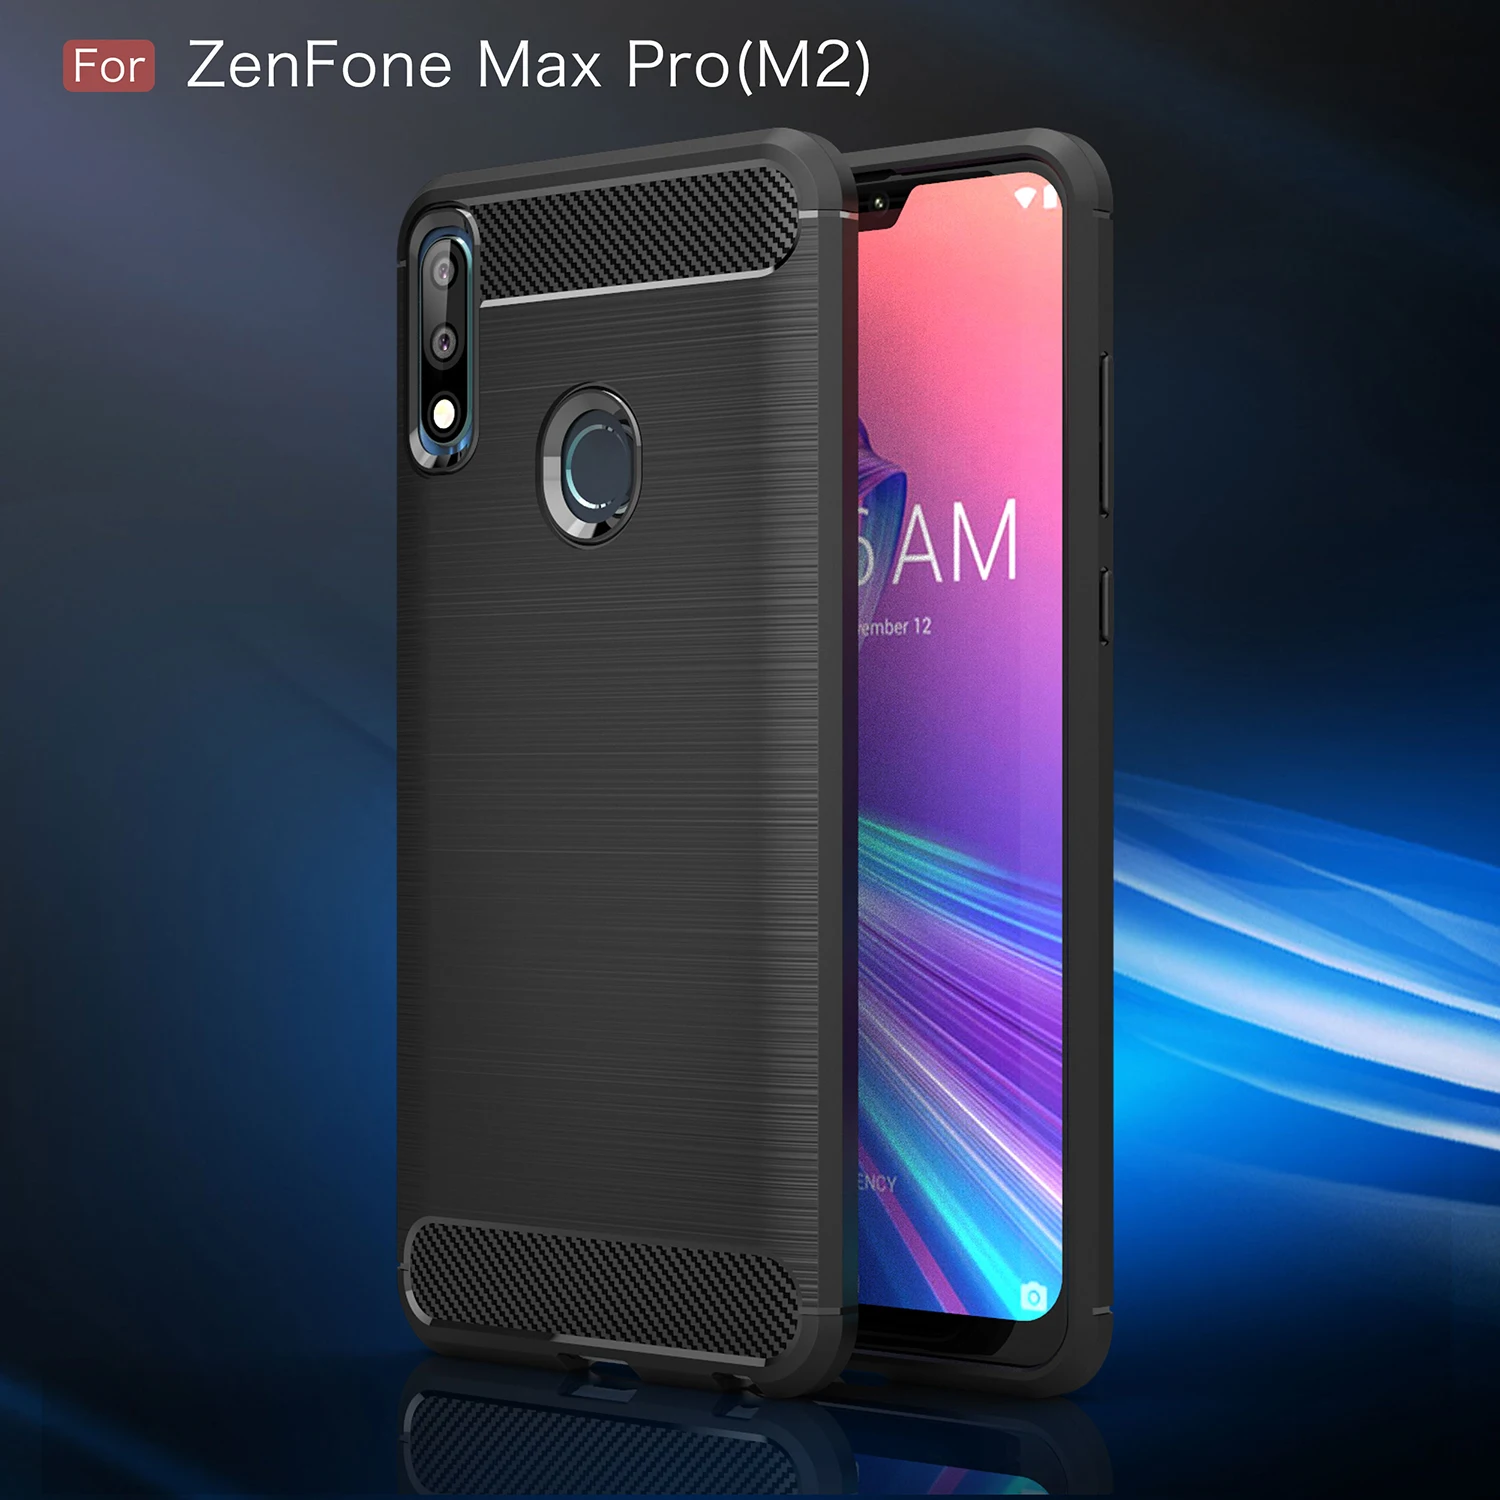 

Luxury Carbon Fiber Shockproof Case For Asus Zenfone Max Pro M1 M2 ZB601KL ZB602KL ZB631KL ZB633KL Soft TPU Silicone Back Cover